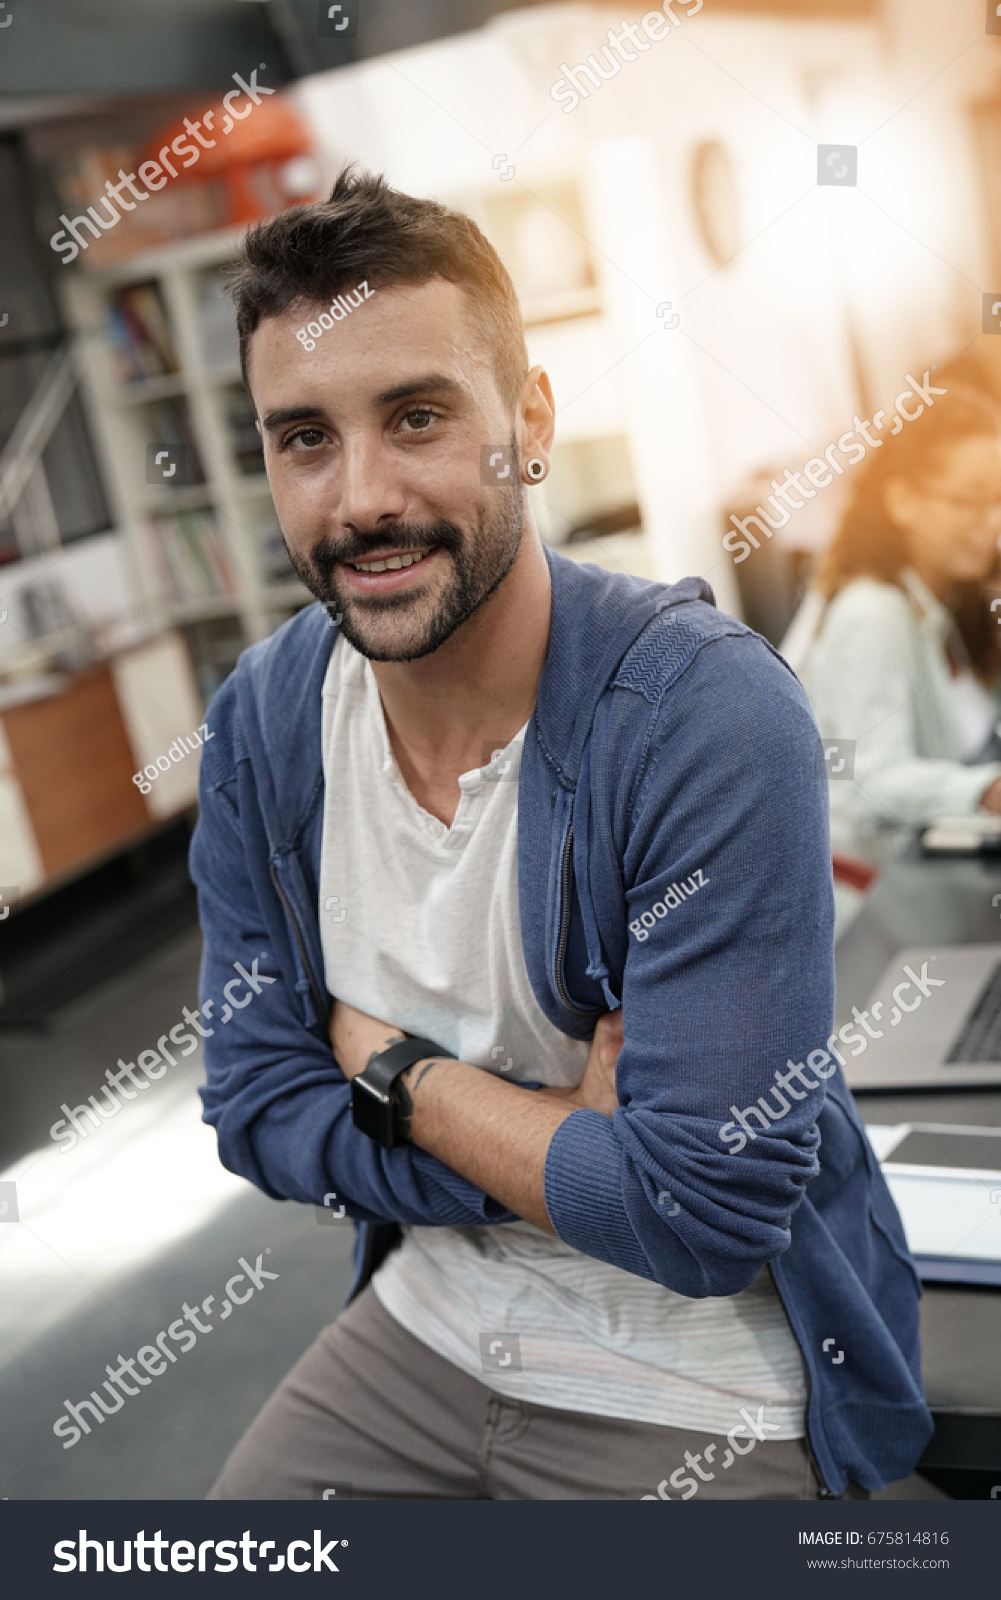 Trendy guy in coworking office with arms crossed #675814816